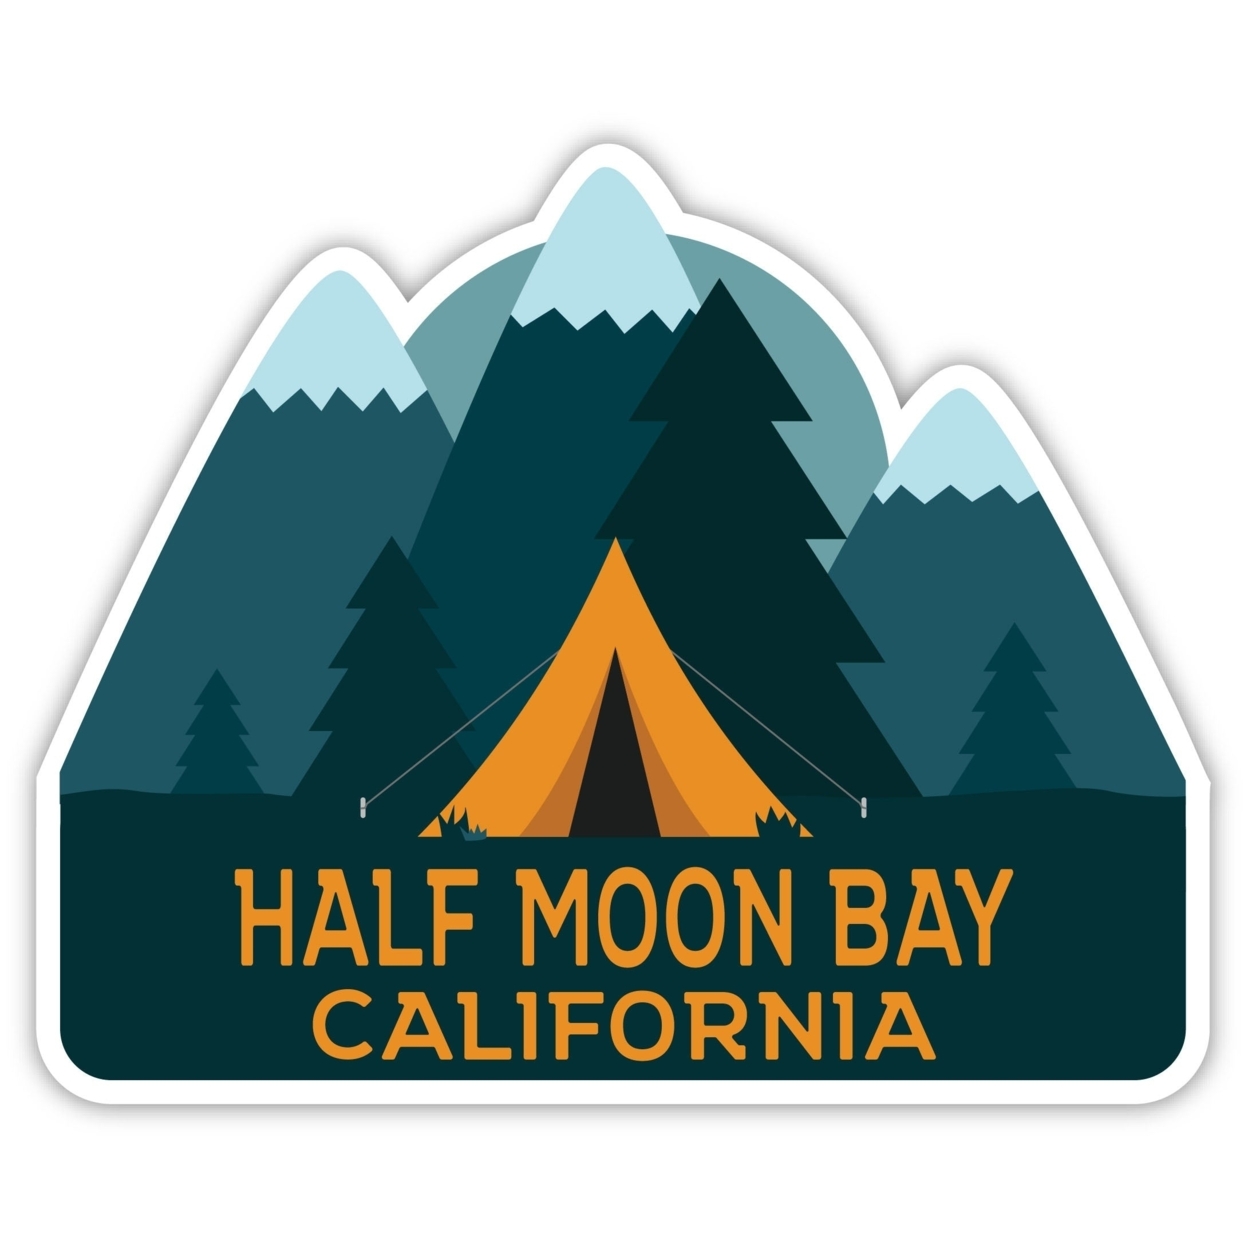 Half Moon Bay California Souvenir Decorative Stickers (Choose Theme And Size) - 4-Pack, 6-Inch, Tent